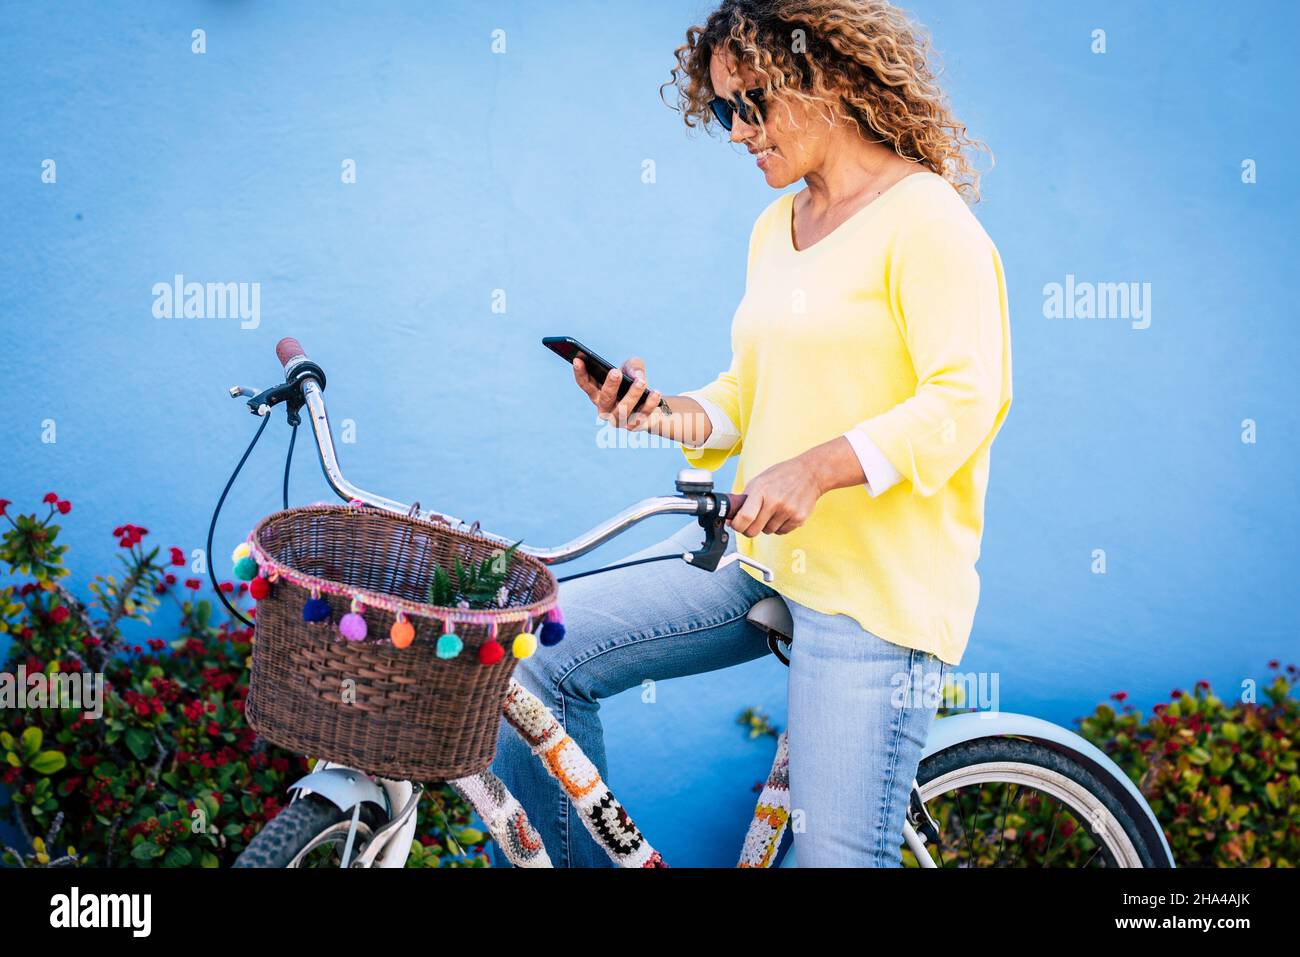 colorful yellow and blue image of young woman using cell phone sitting on a cute bike and blue wall in background with flowers. concept of happy leisure activity outdoor people Stock Photo